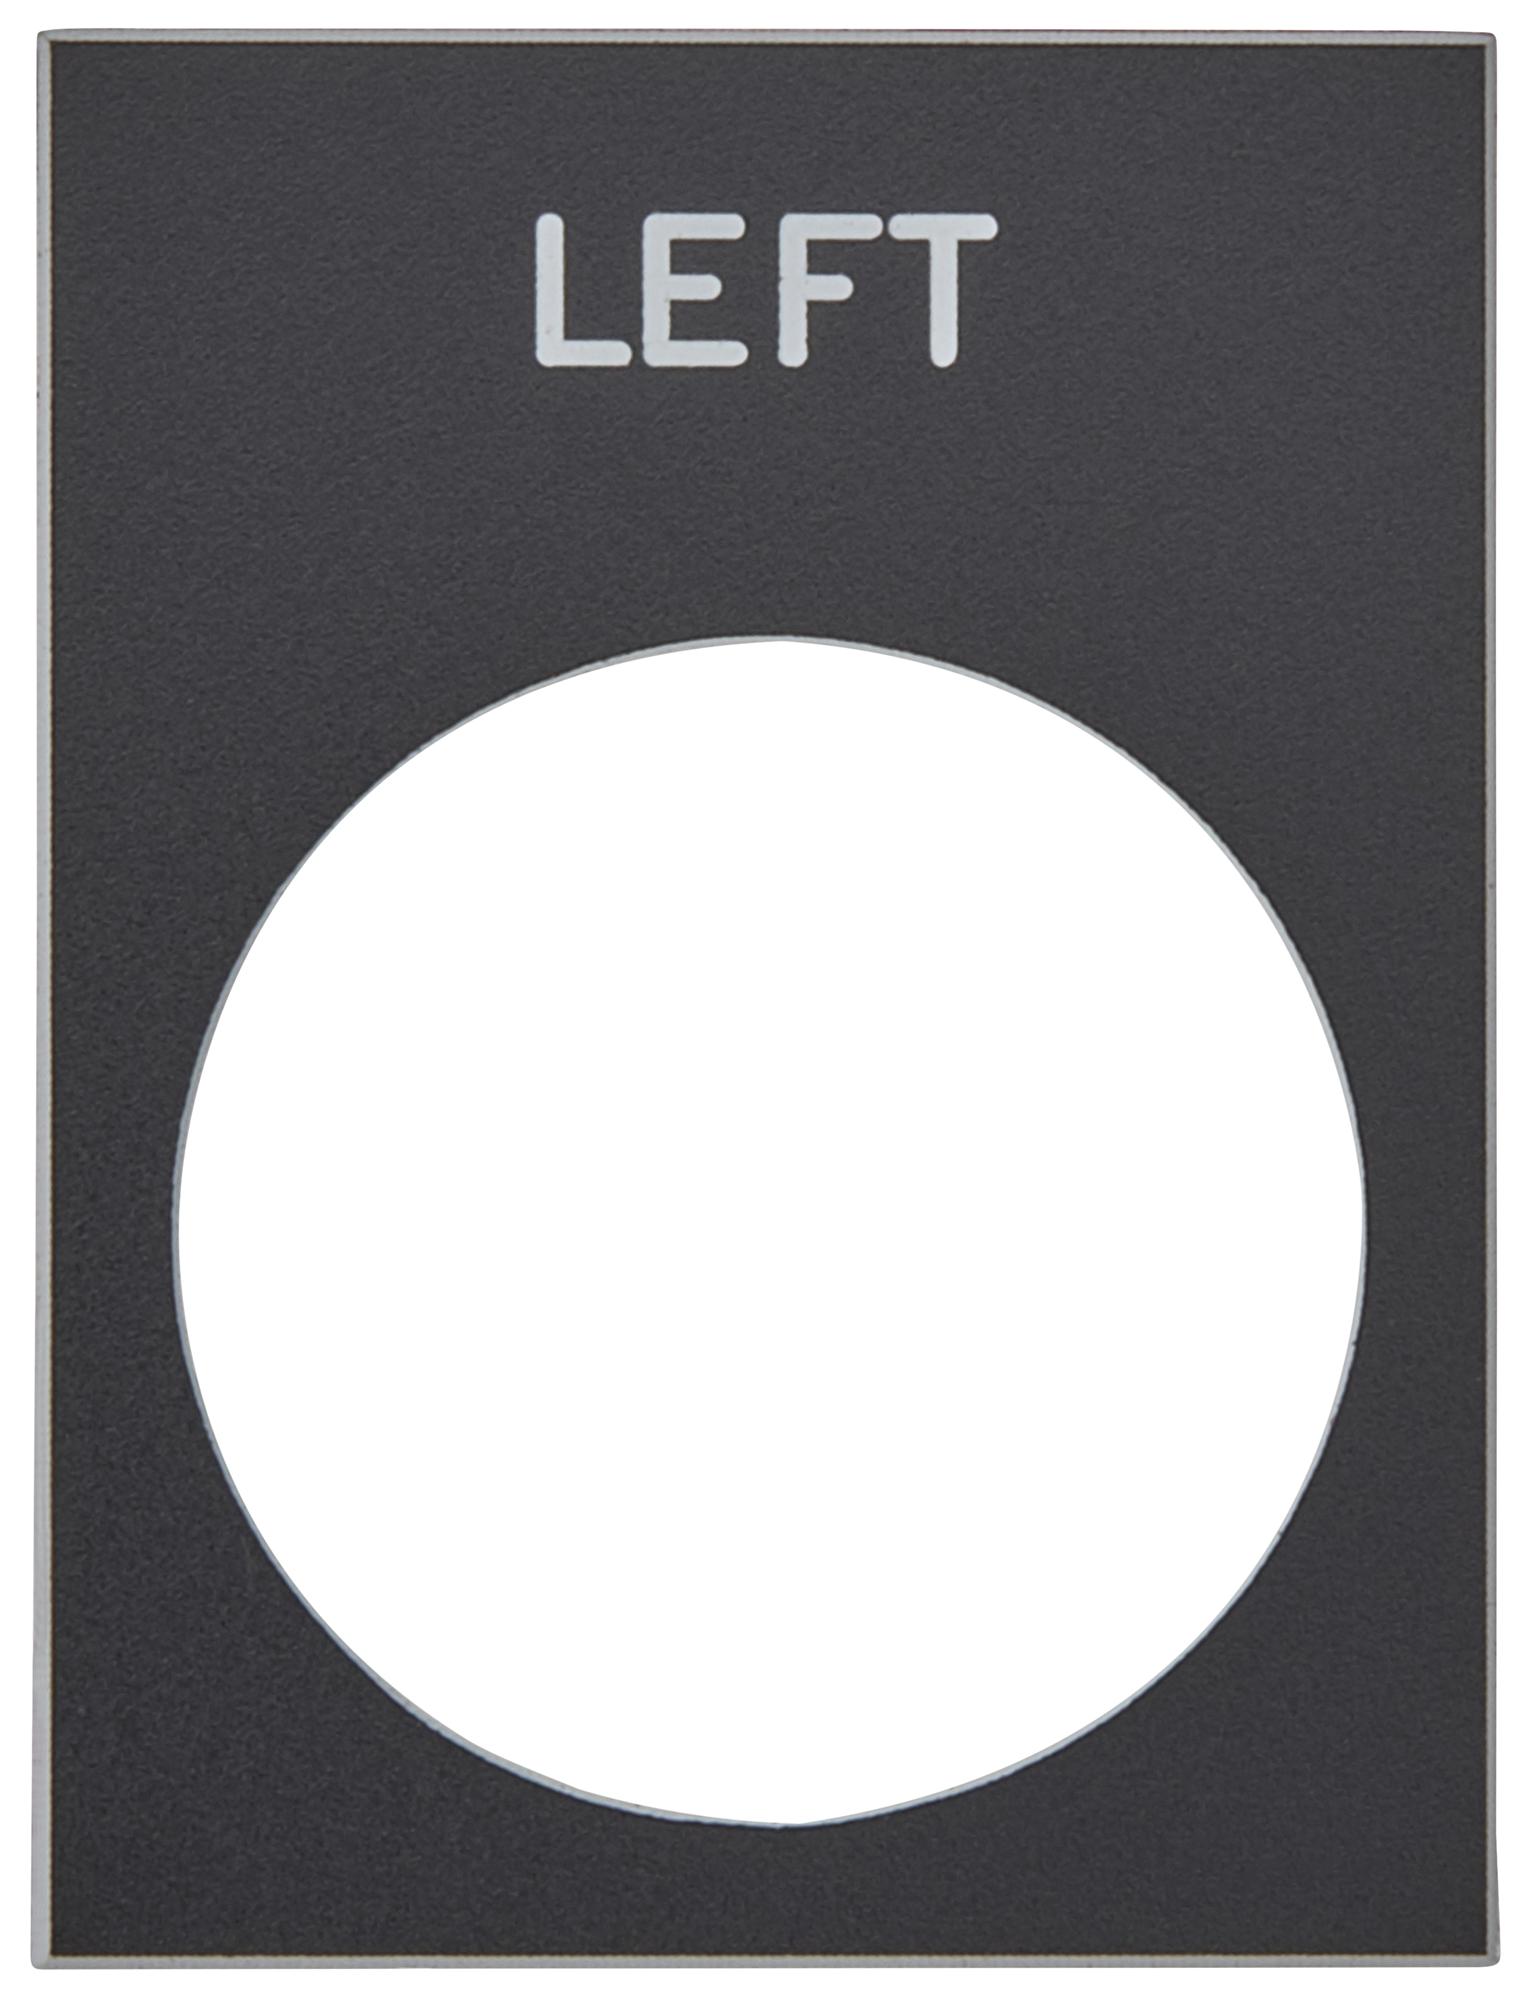 SCHNEIDER ELECTRIC Legends ZB2BY2310 NAME PLATE, 30MM X 40 MM, PUSHBUTTON SCHNEIDER ELECTRIC 3115131 ZB2BY2310